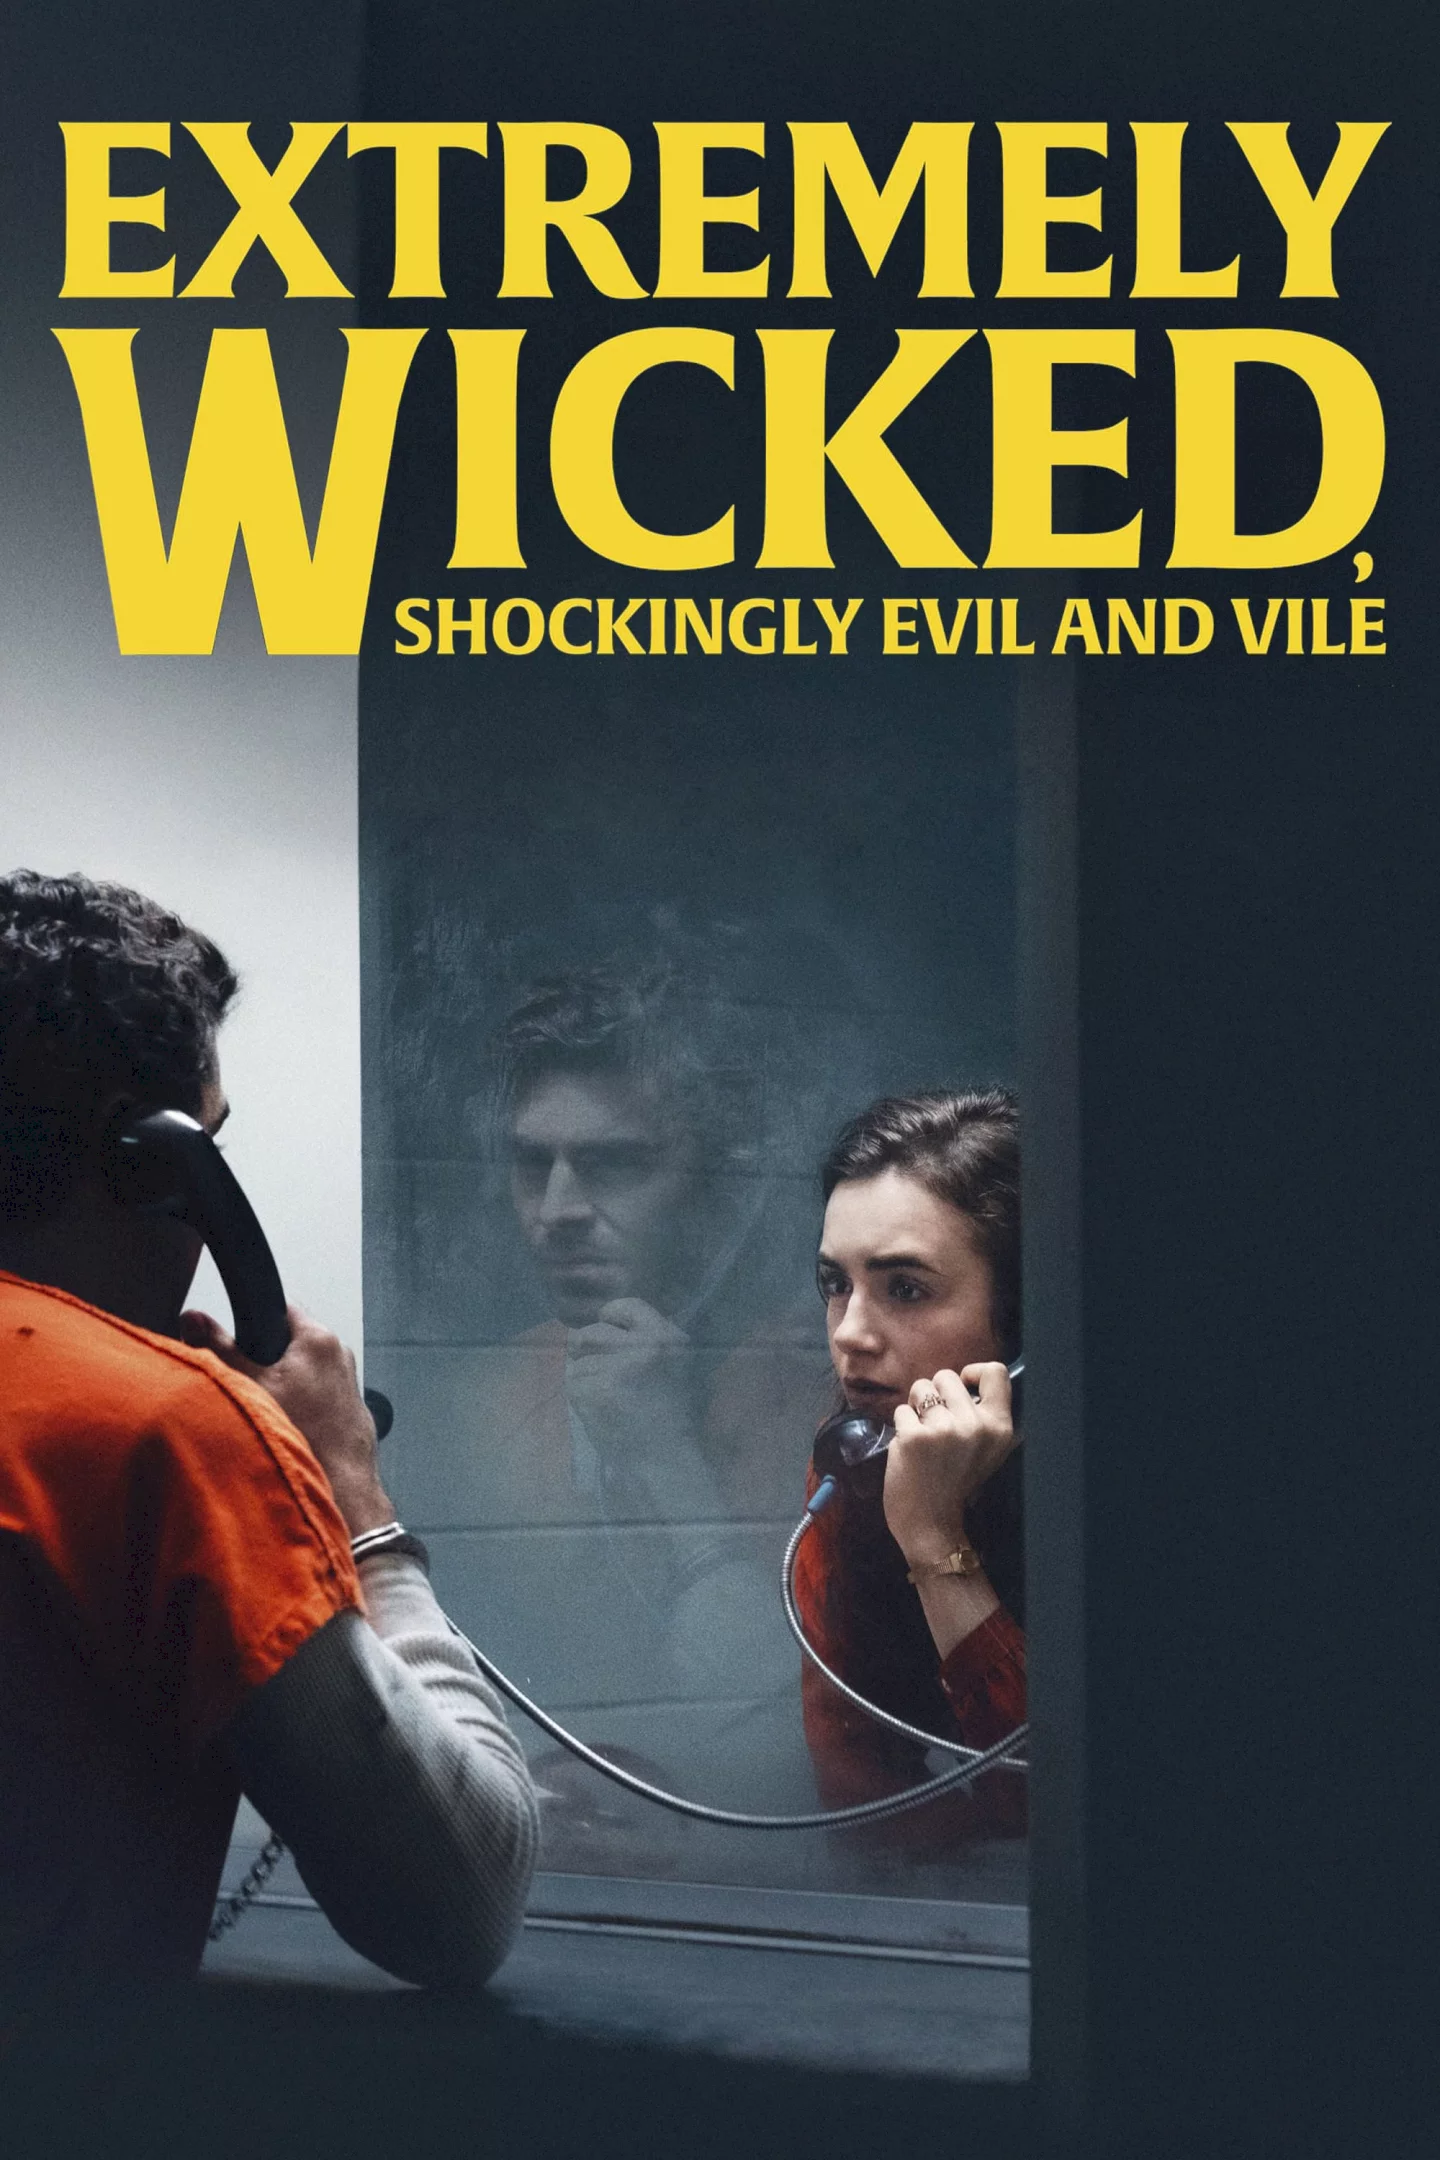 Photo 7 du film : Extremely Wicked, Shockingly Evil and Vile